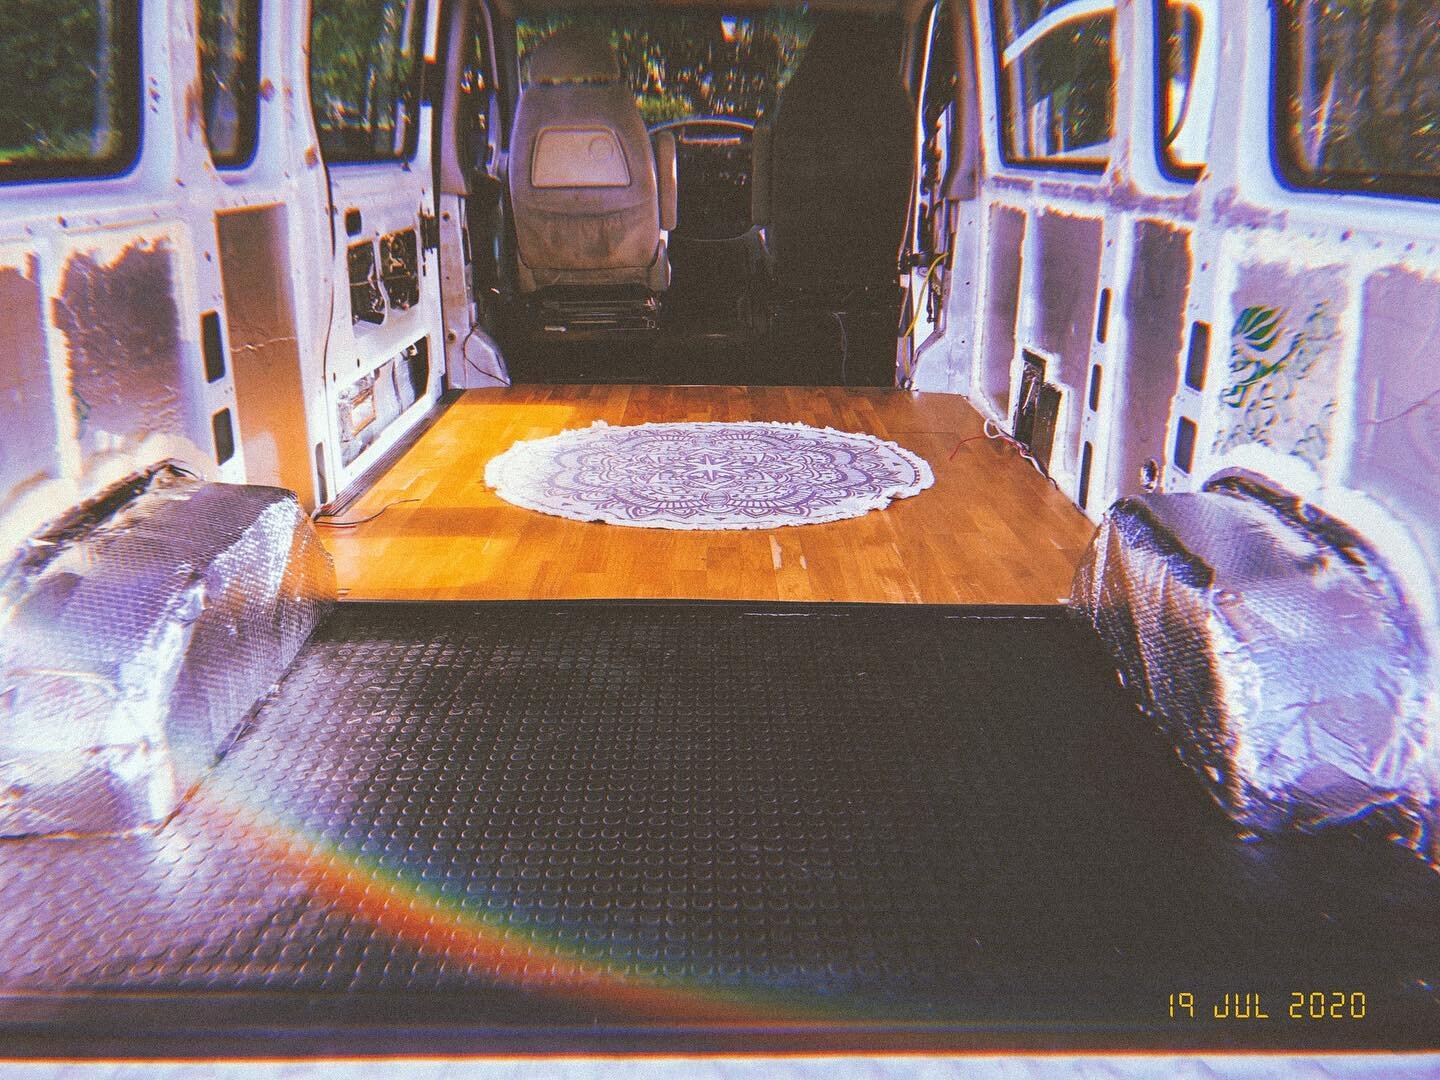 More floor progress! 👀

We&rsquo;ve fitted this rubber matting at the back of our van where the garage will be under the bed! 🚐

#vanbuild #vanconversion #selfbuildcamper #diycampervan #minibusconversion #vanvibes #vanlife #vancouple #travel #homei